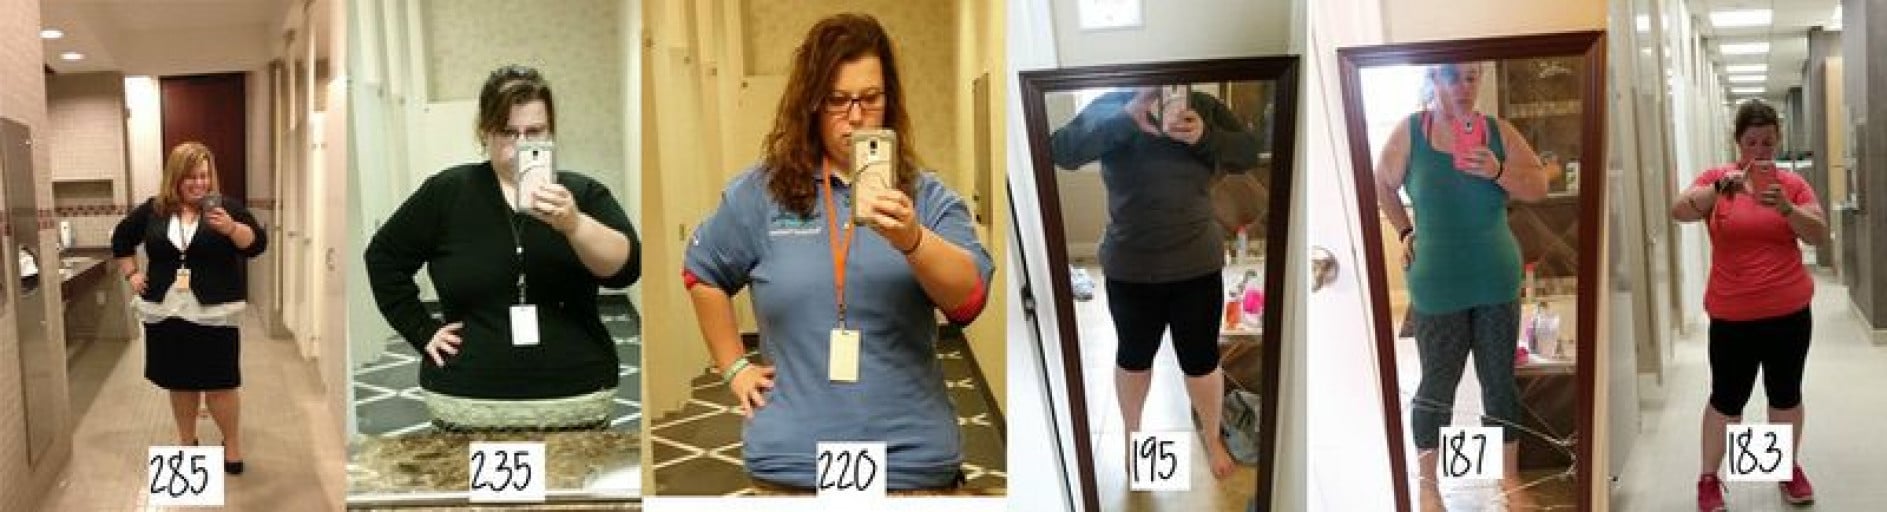 A photo of a 4'11" woman showing a weight loss from 285 pounds to 183 pounds. A respectable loss of 102 pounds.